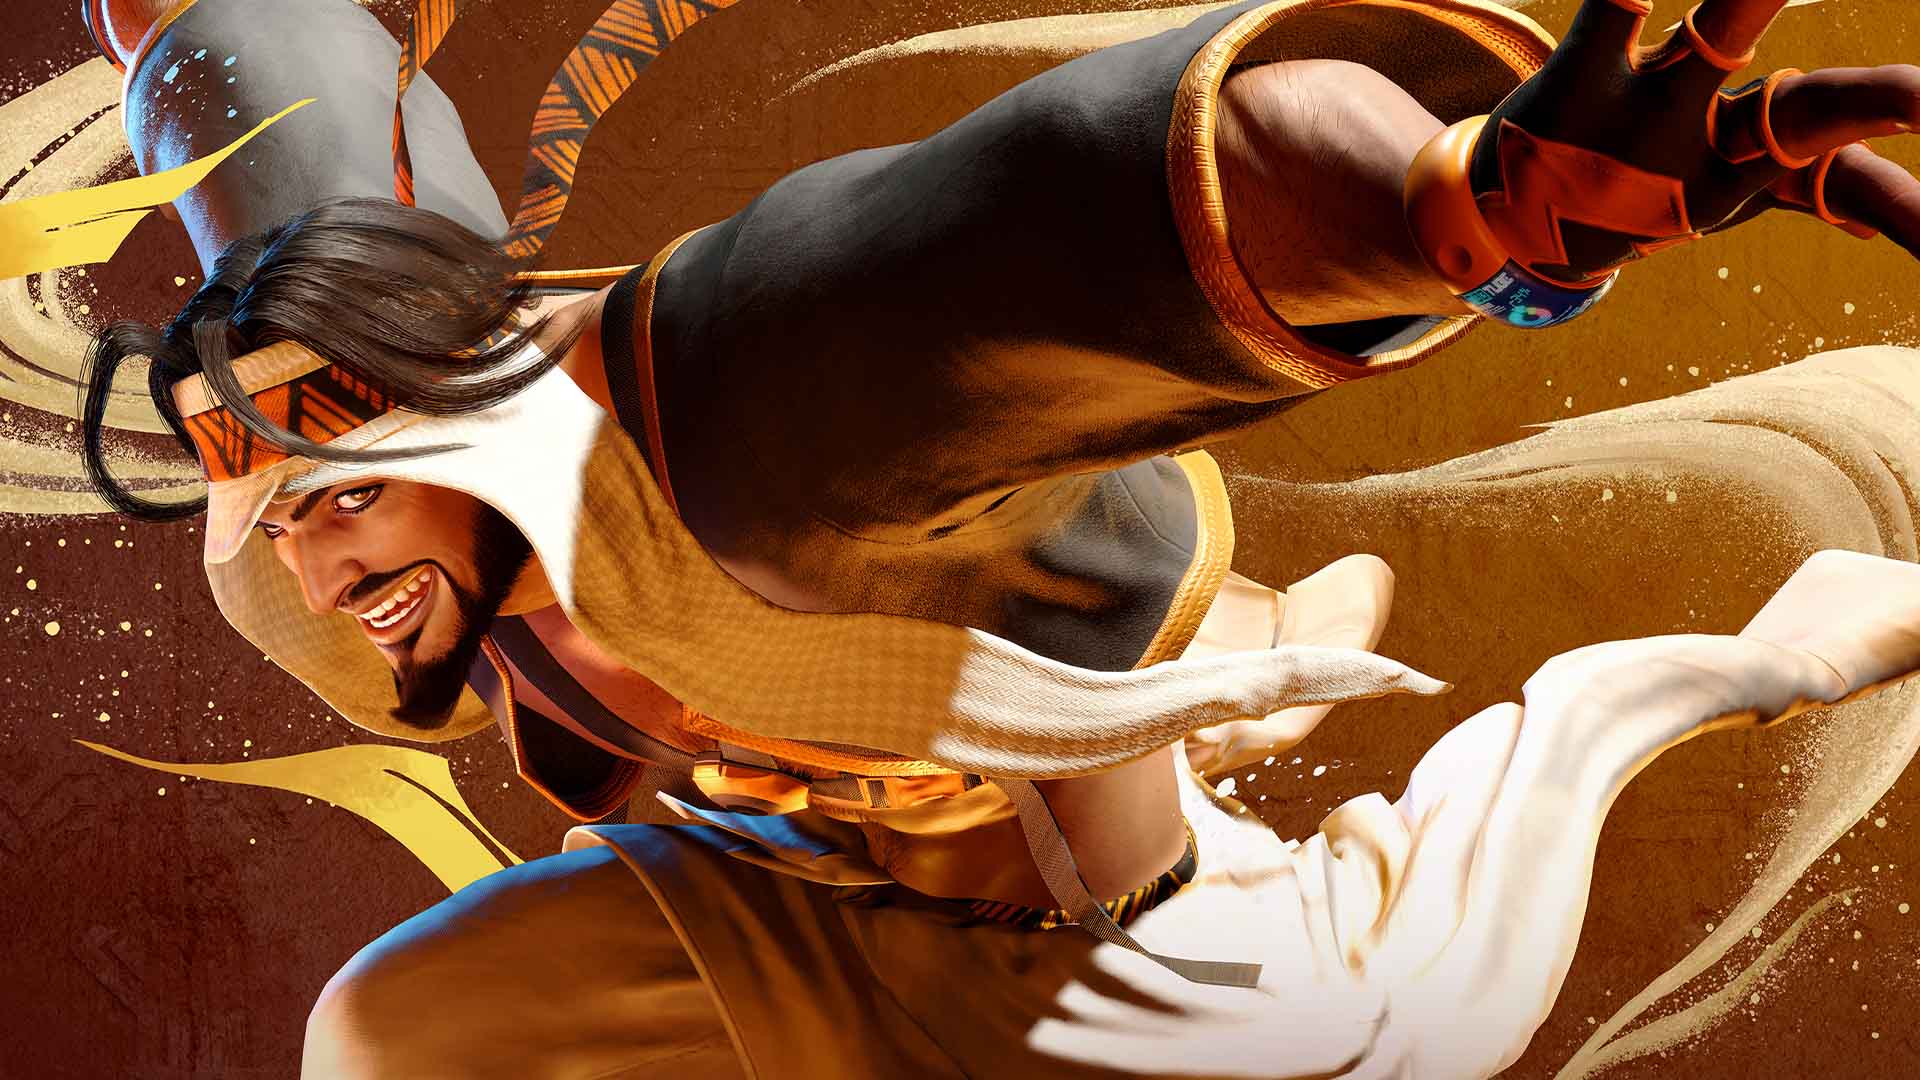 Is Street Fighter 6 on Game Pass?